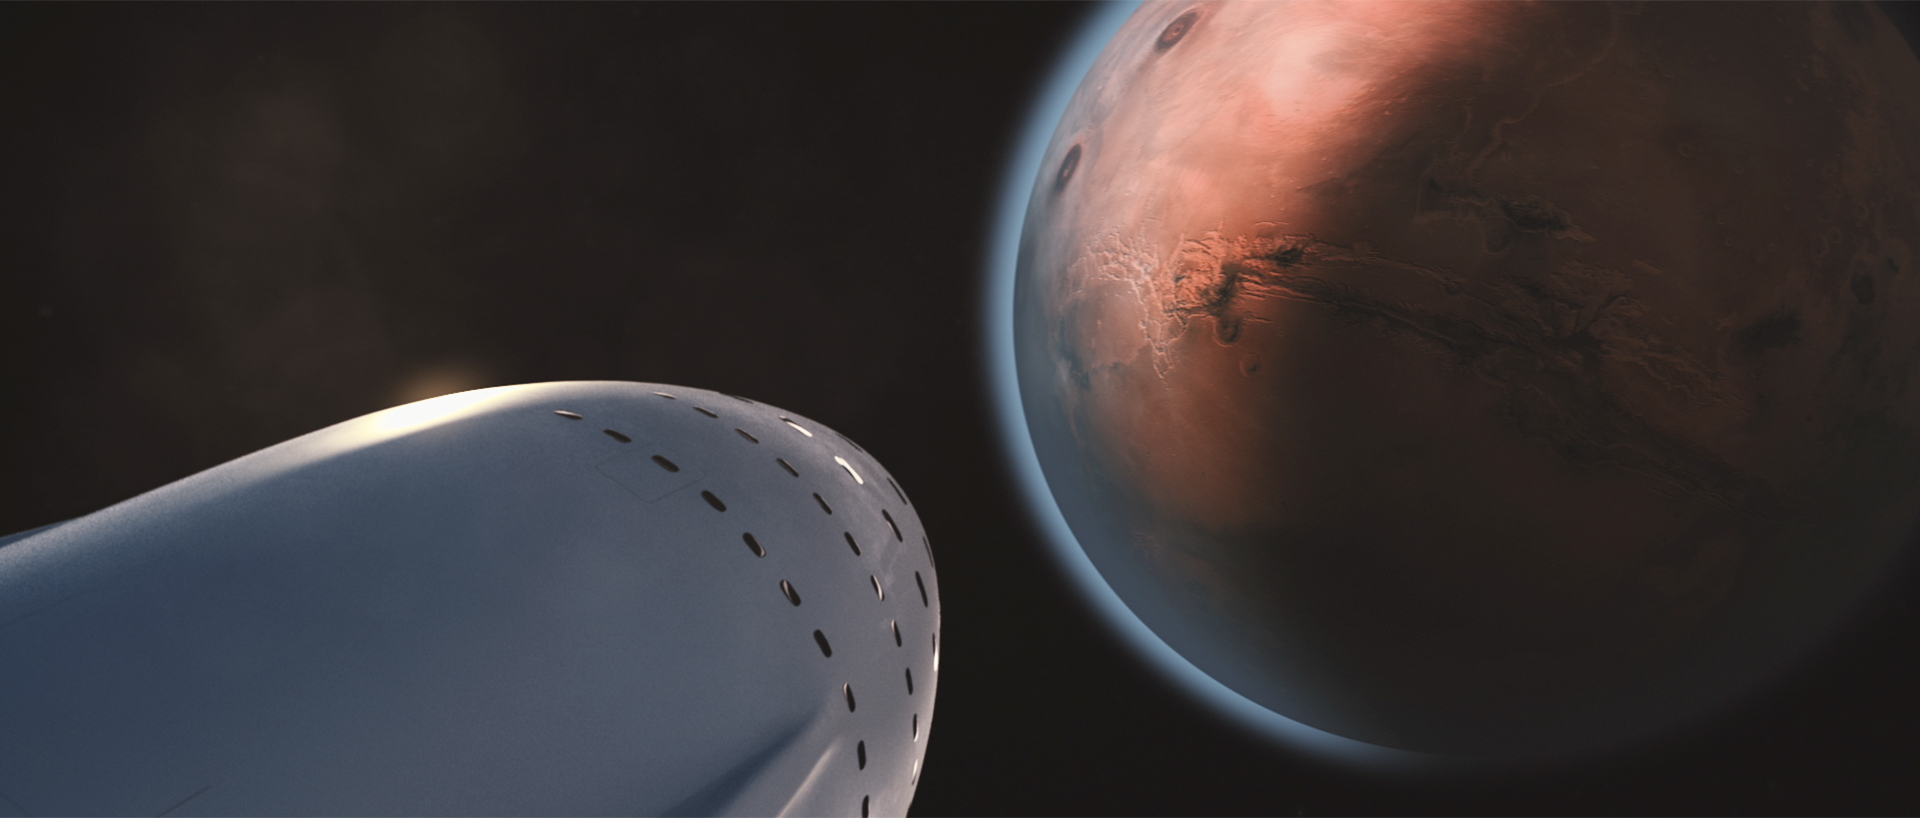 1st Mars Colonists Should Be 'Prepared to Die,' Elon Musk Says